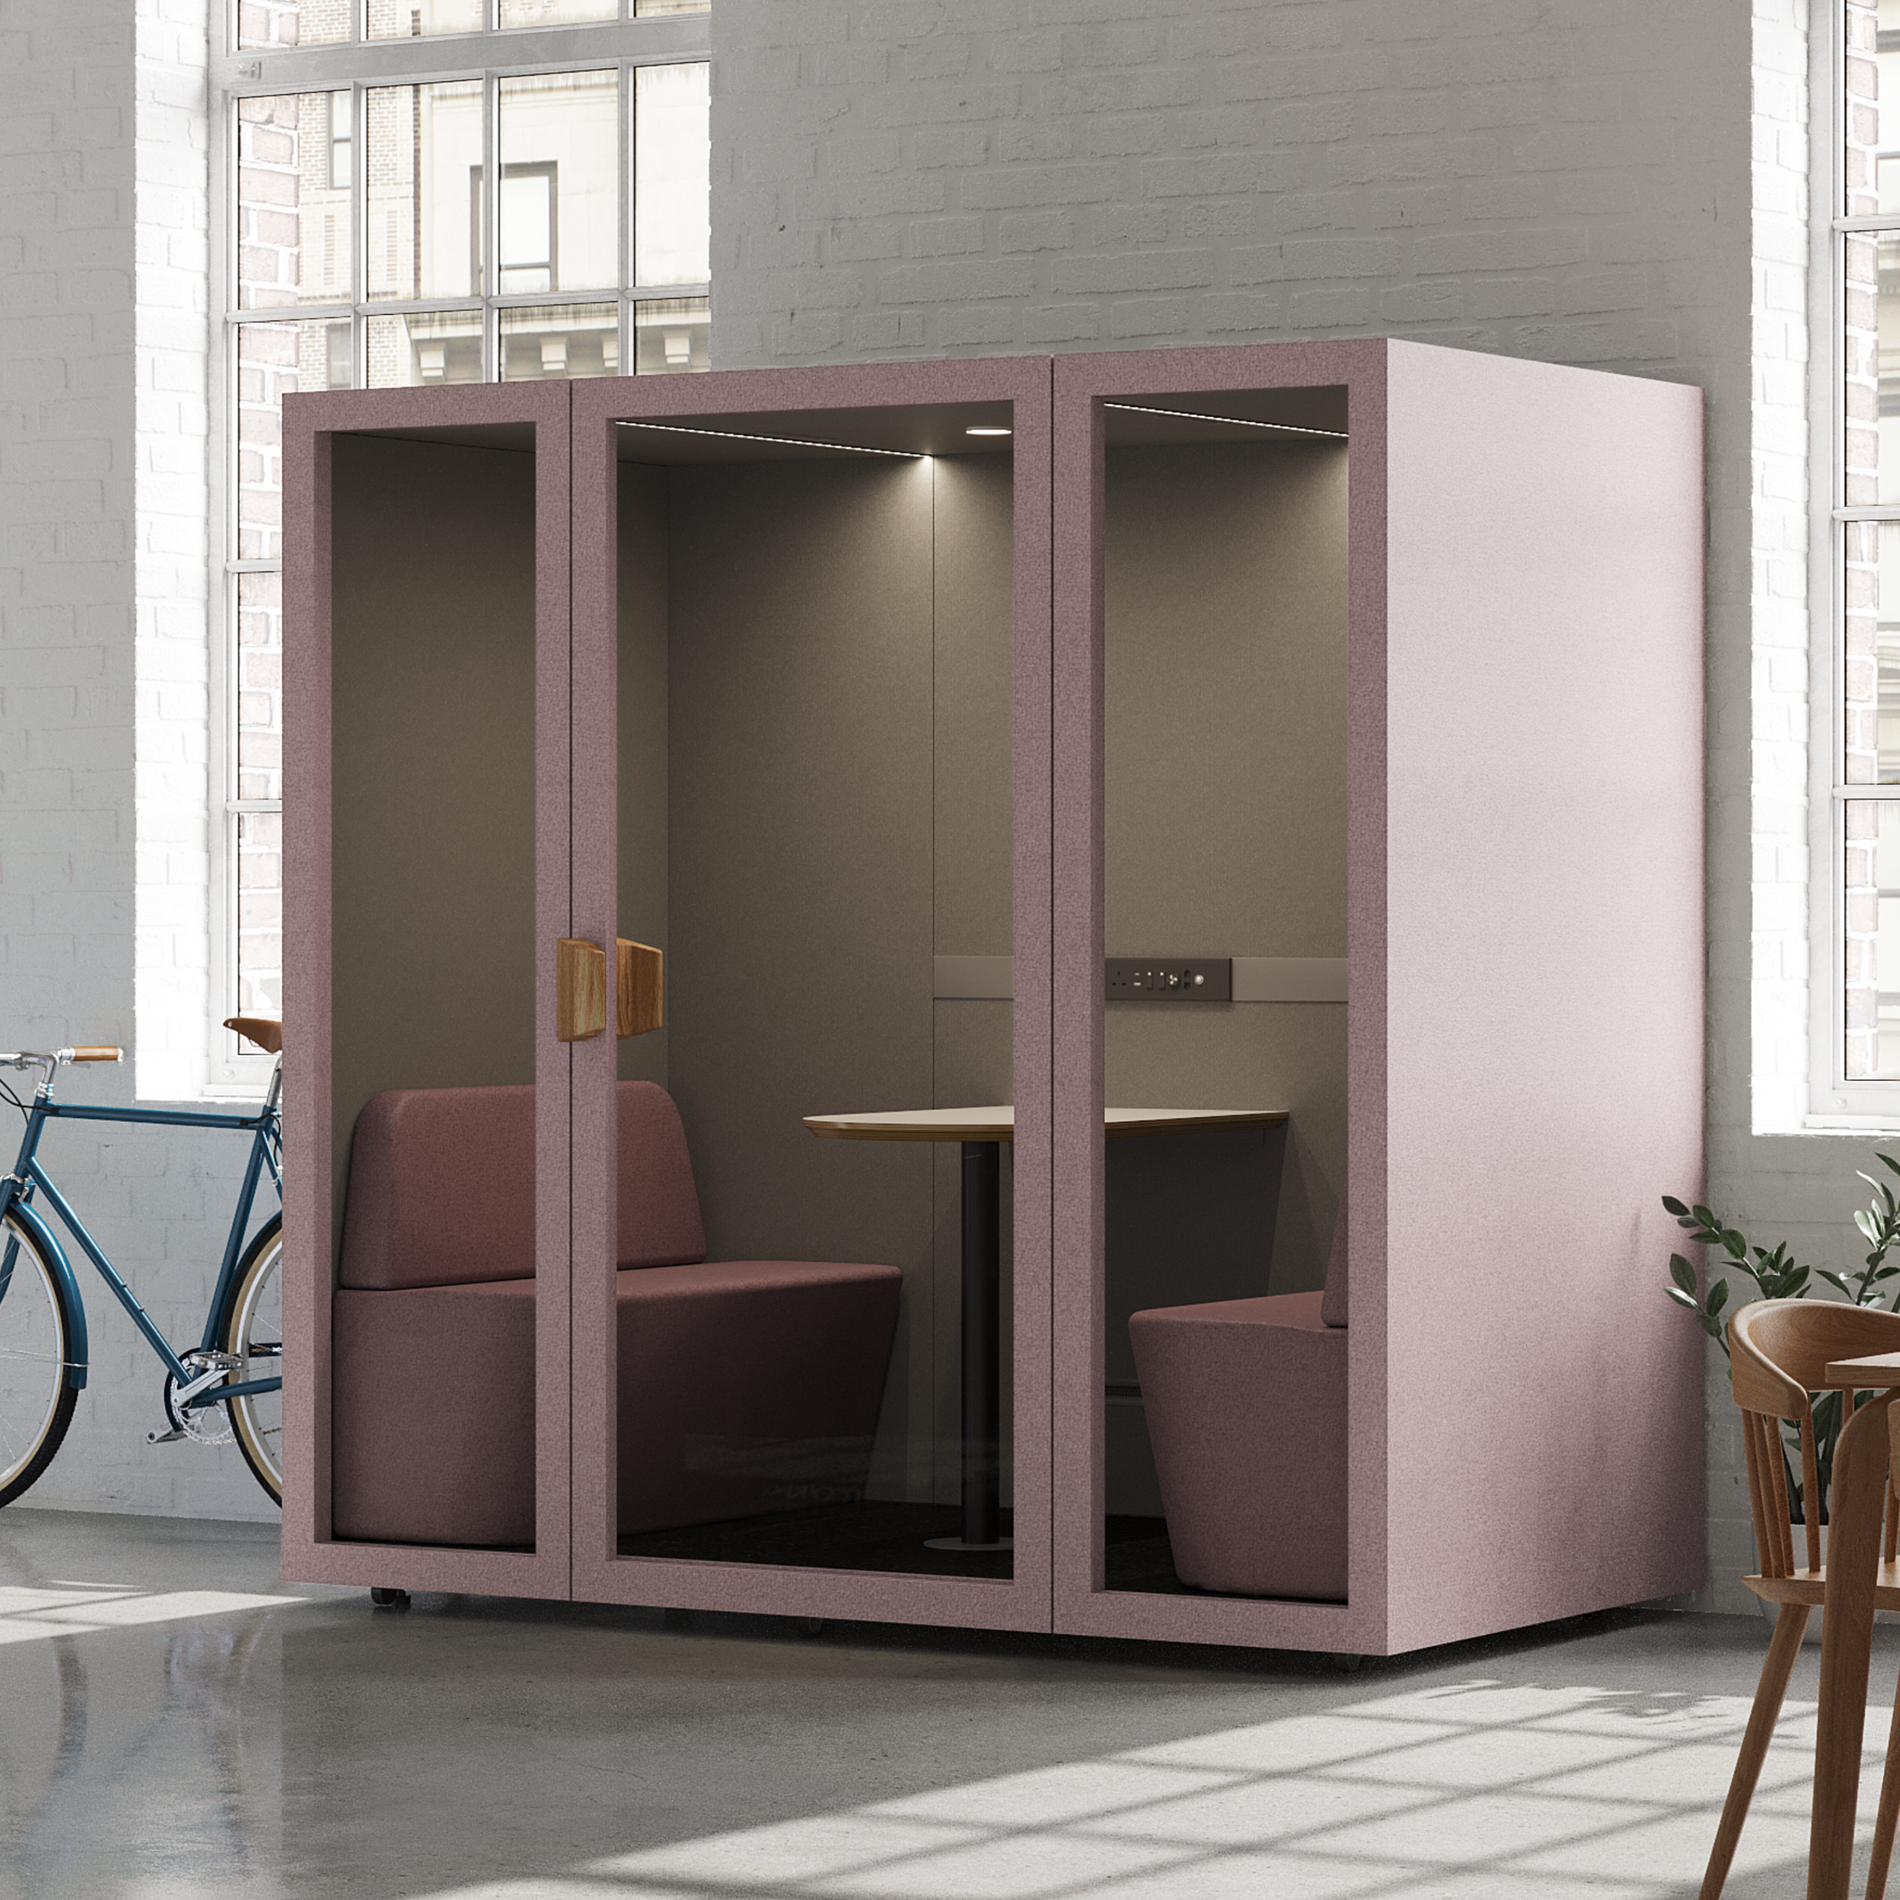 Office Pod - 2-4 PersonFolio Blush / Furniture As Per Images